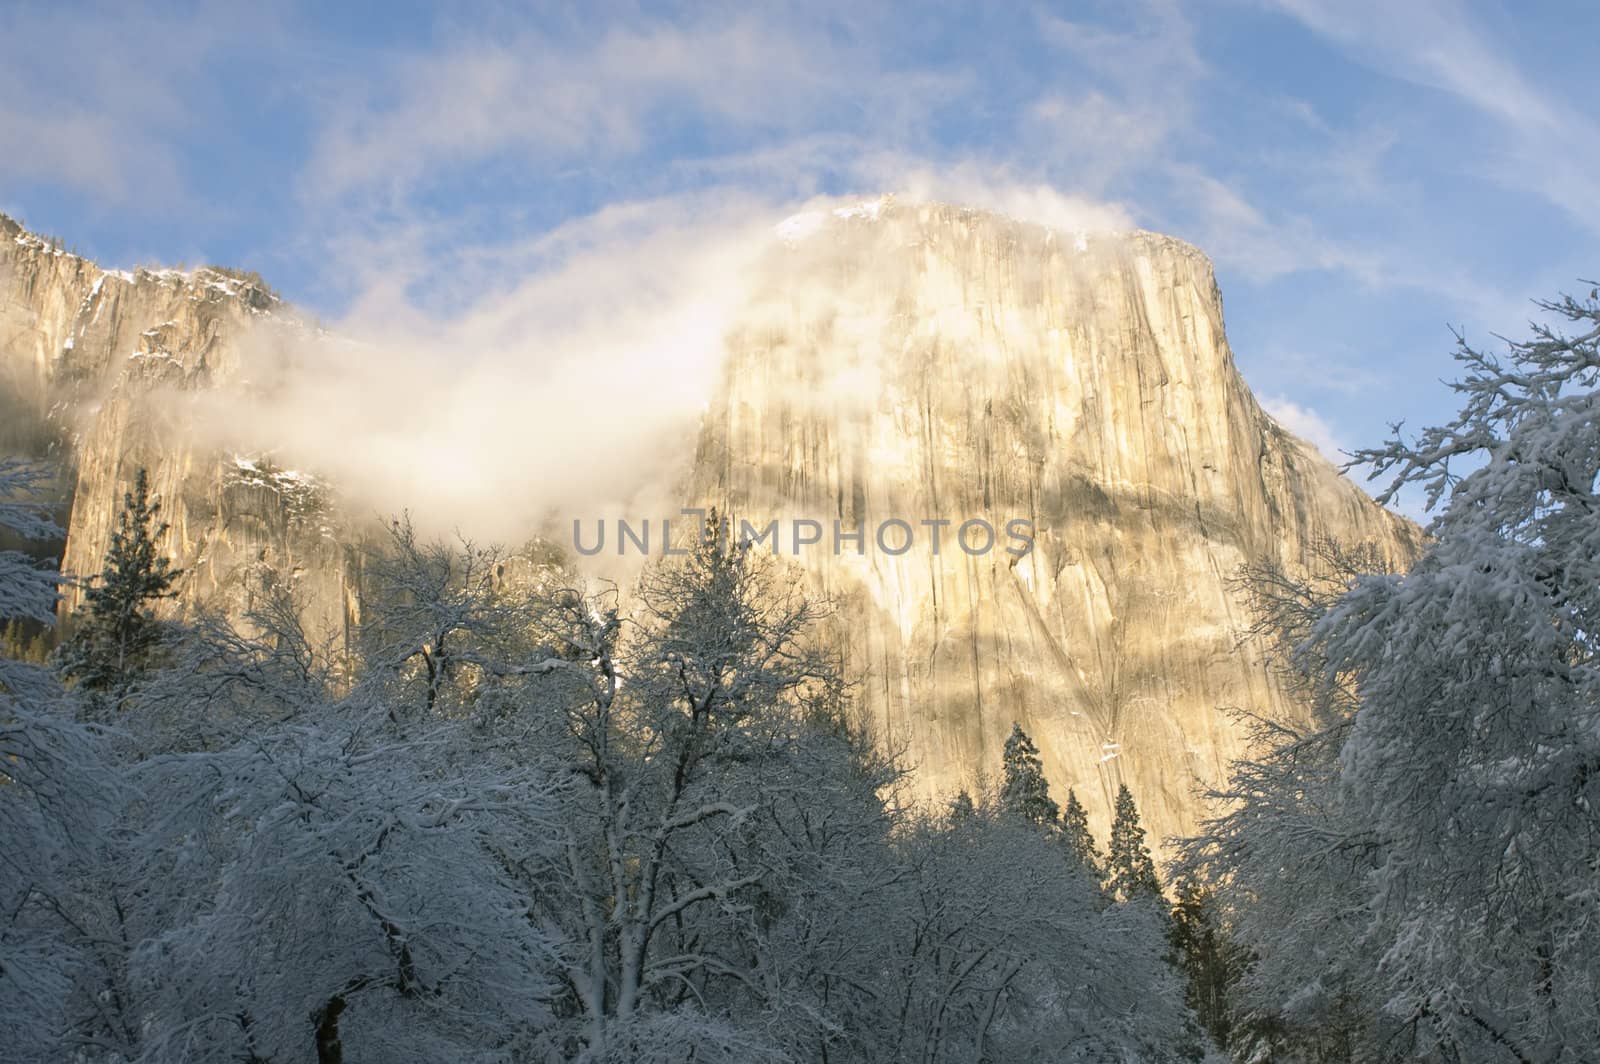 El Capitan with small whispy clouds in the winter at sunset